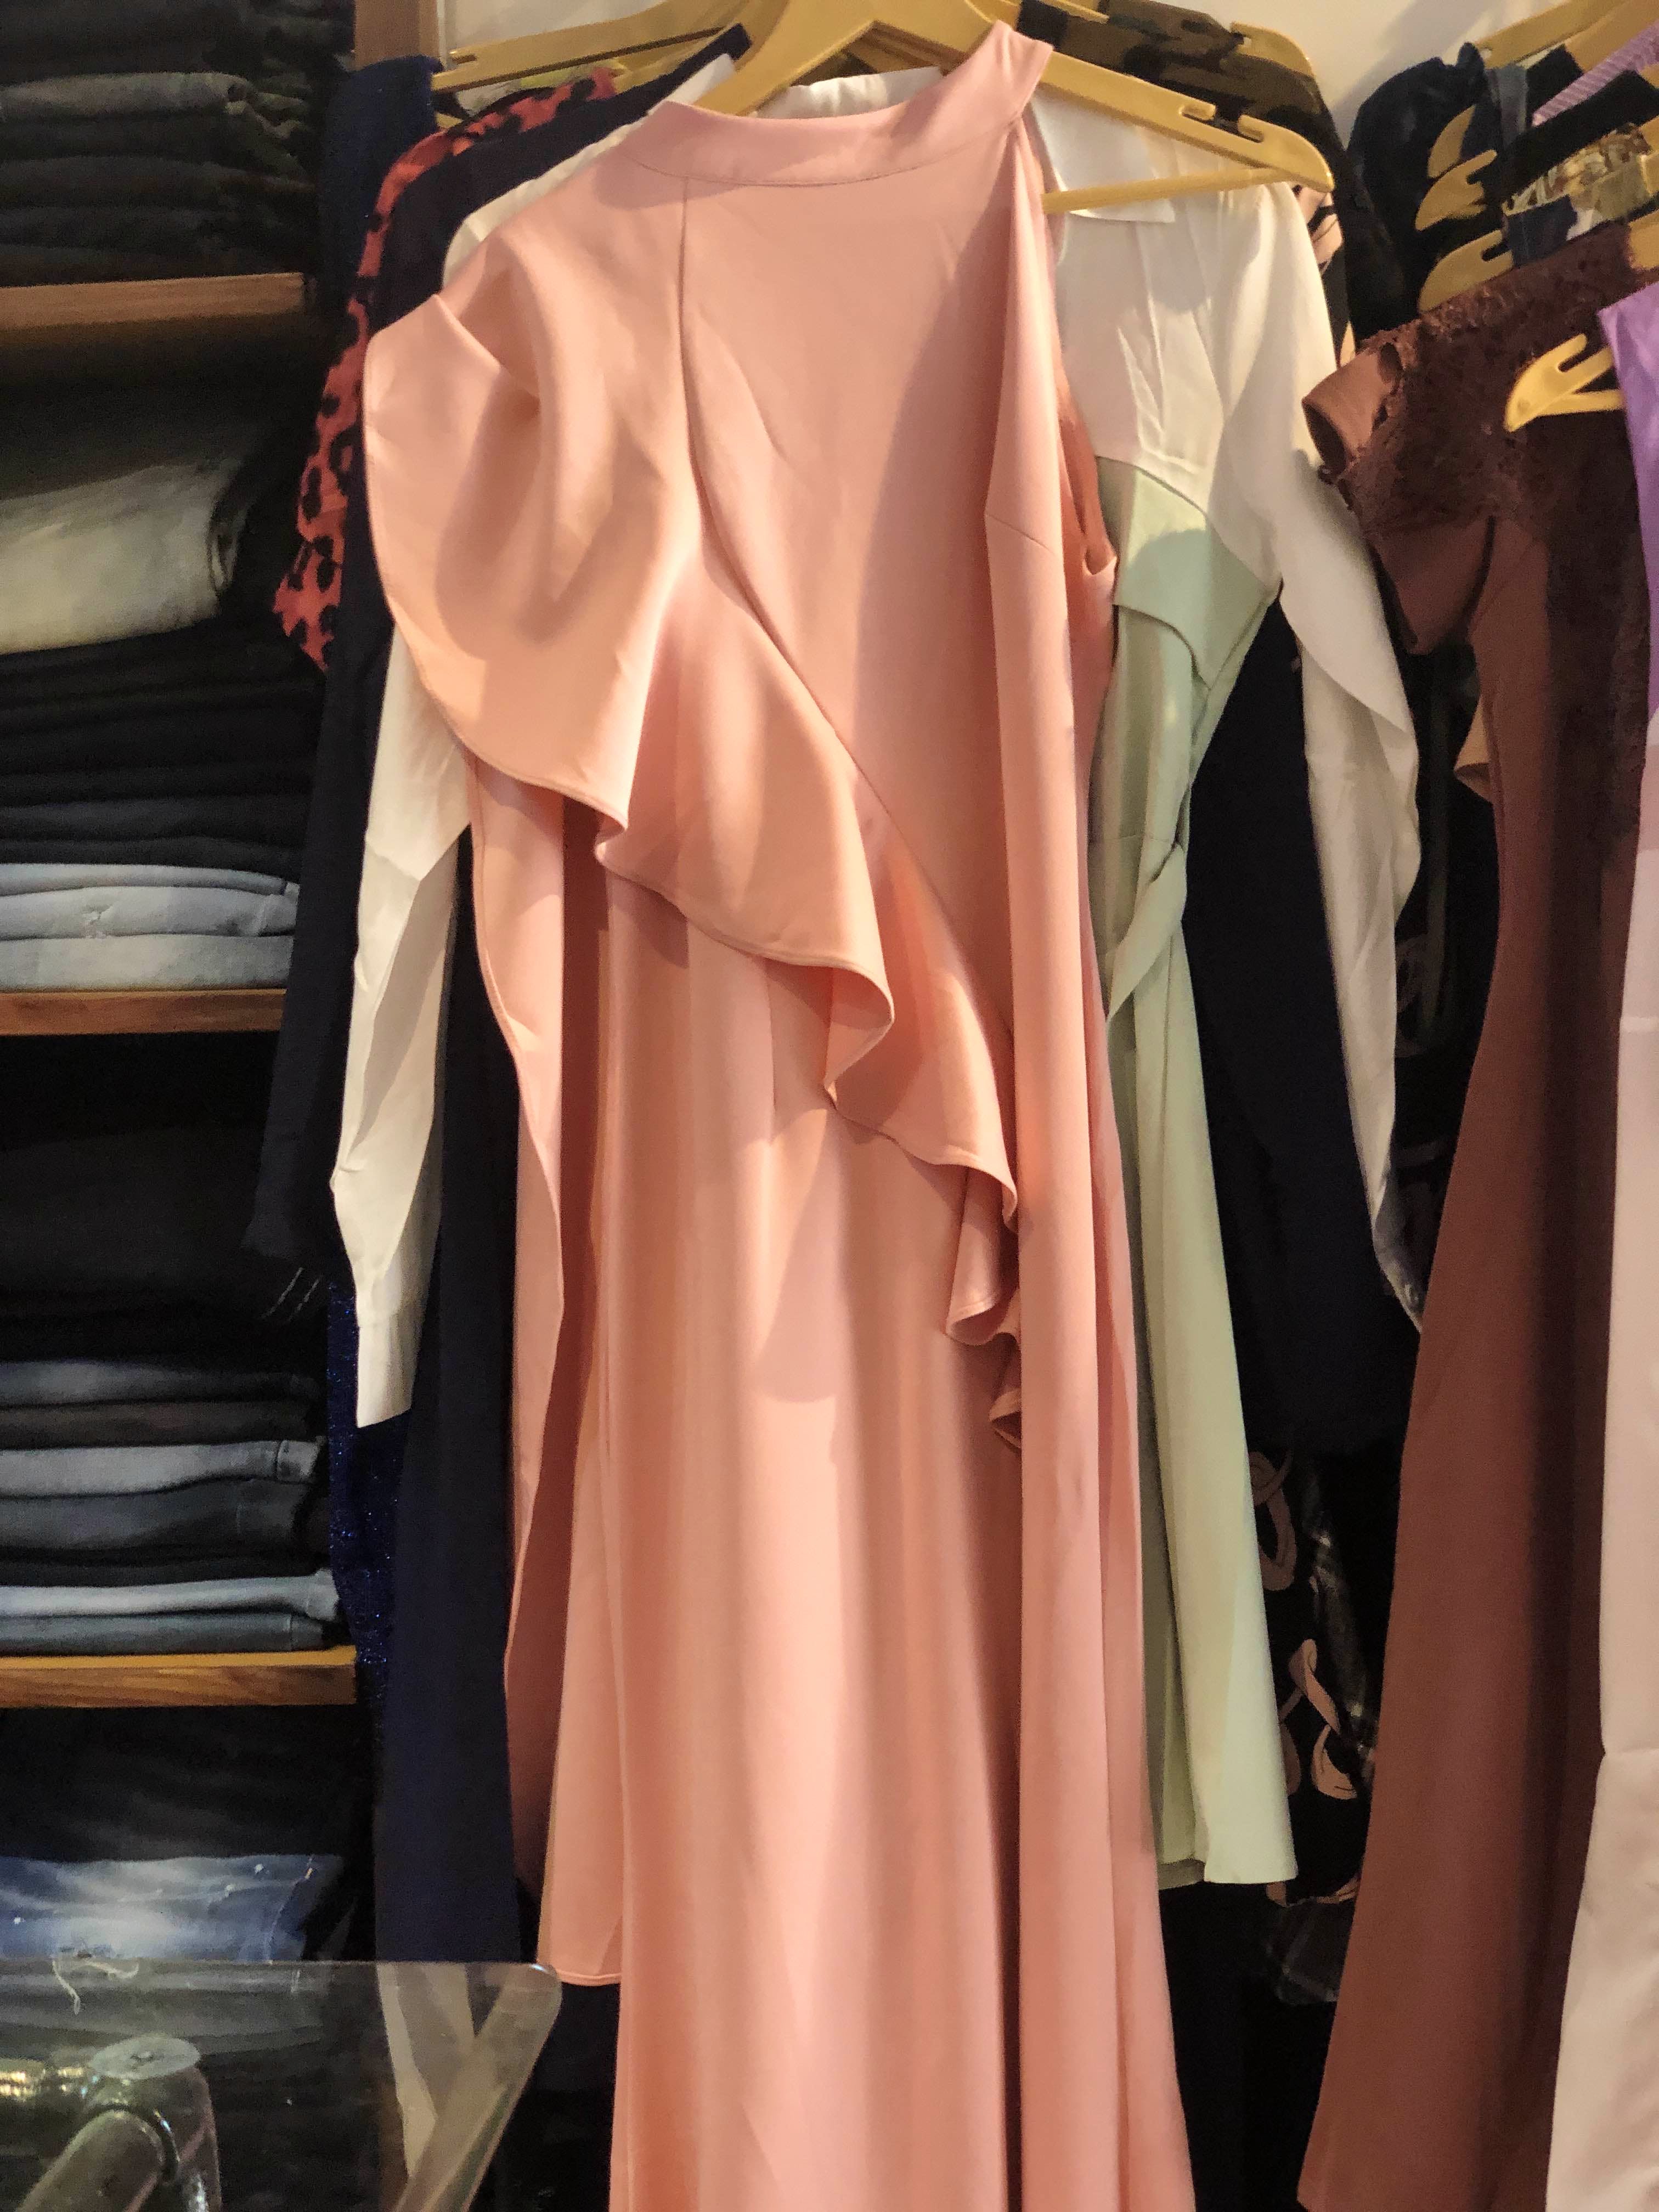 Clothing,Pink,Peach,Dress,Fashion,Boutique,Room,Clothes hanger,Outerwear,Technology